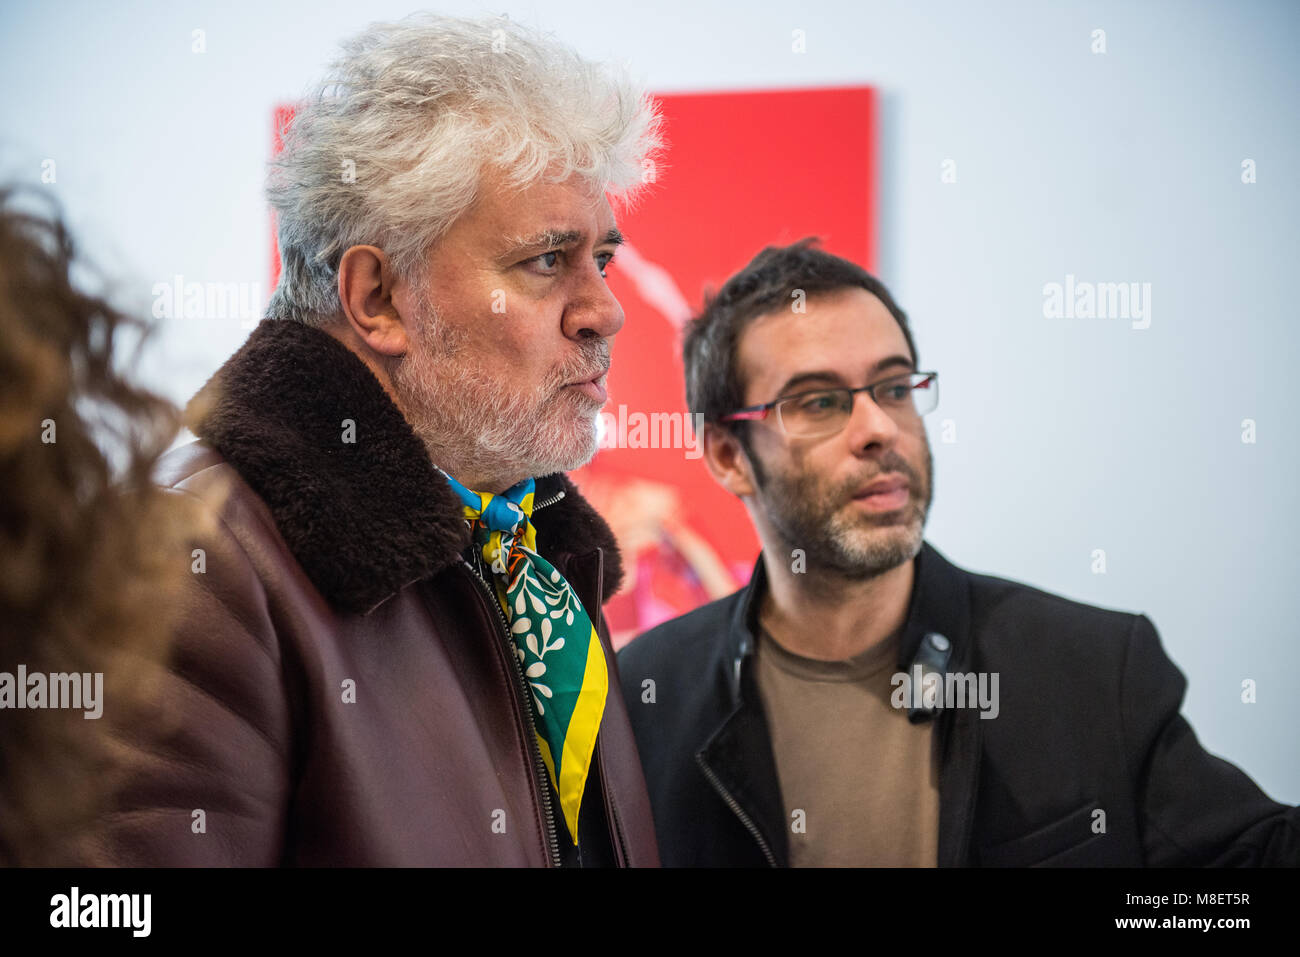 Cáceres, Spain. 17th Mar, 2018. Spanish filmmaker and international director, visits 'Tú y yo no somos como todo el mundo', an exhibition of artworks inspired on his films.  Almodovar will receive this afternoon the Honorary Award at the San Pancracio film festival in Cáceres.  Esteban Martinena/Alamy Live News. Stock Photo